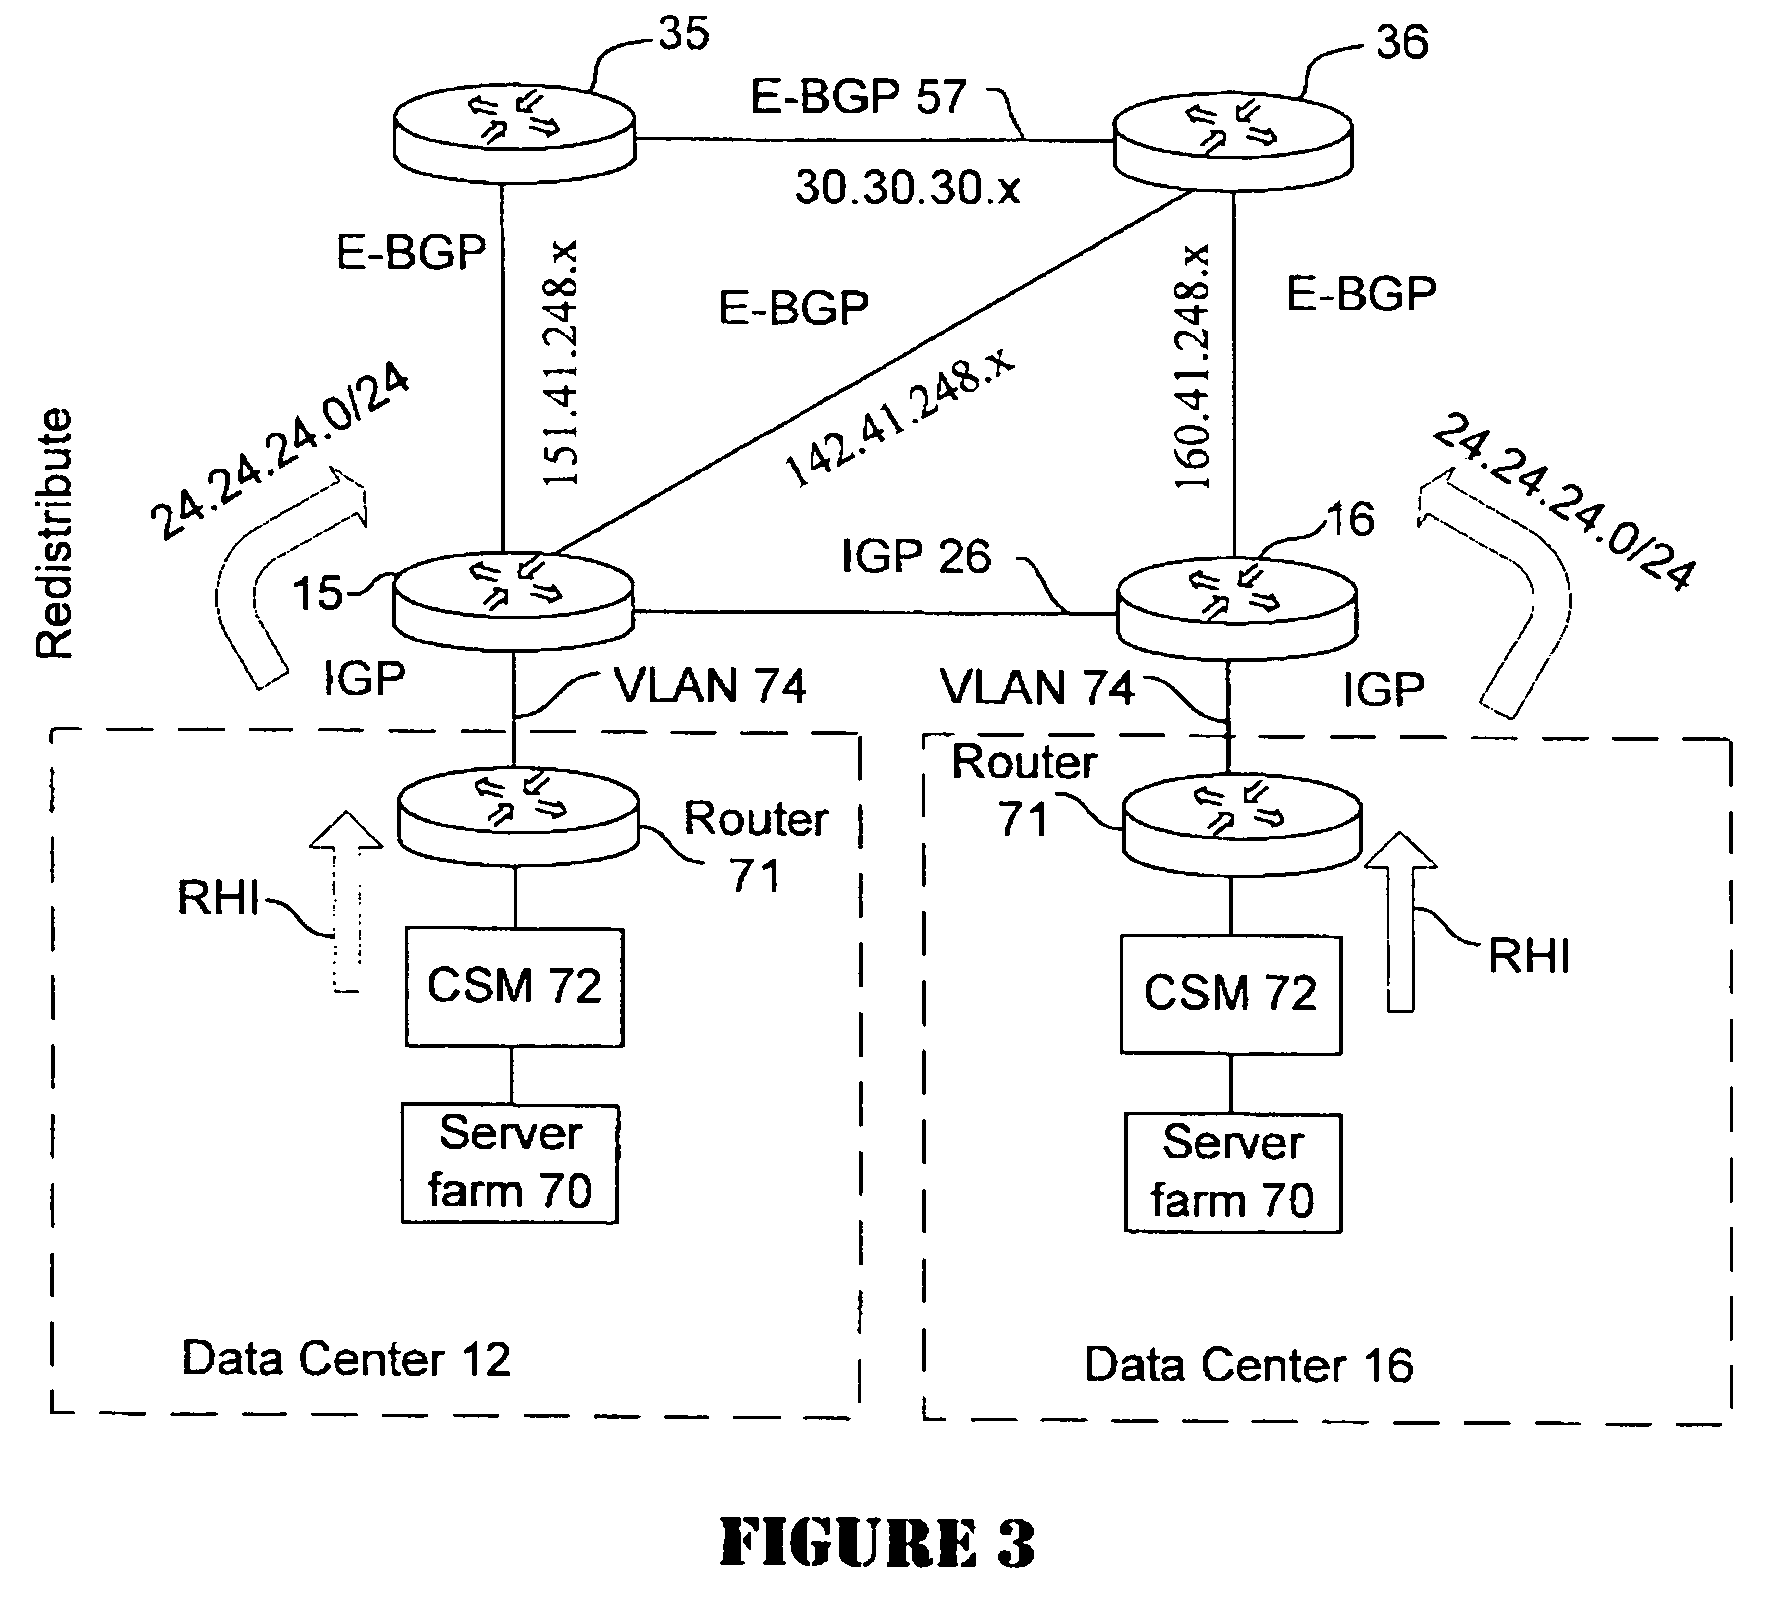 Application based active-active data center network using route health injection and IGP